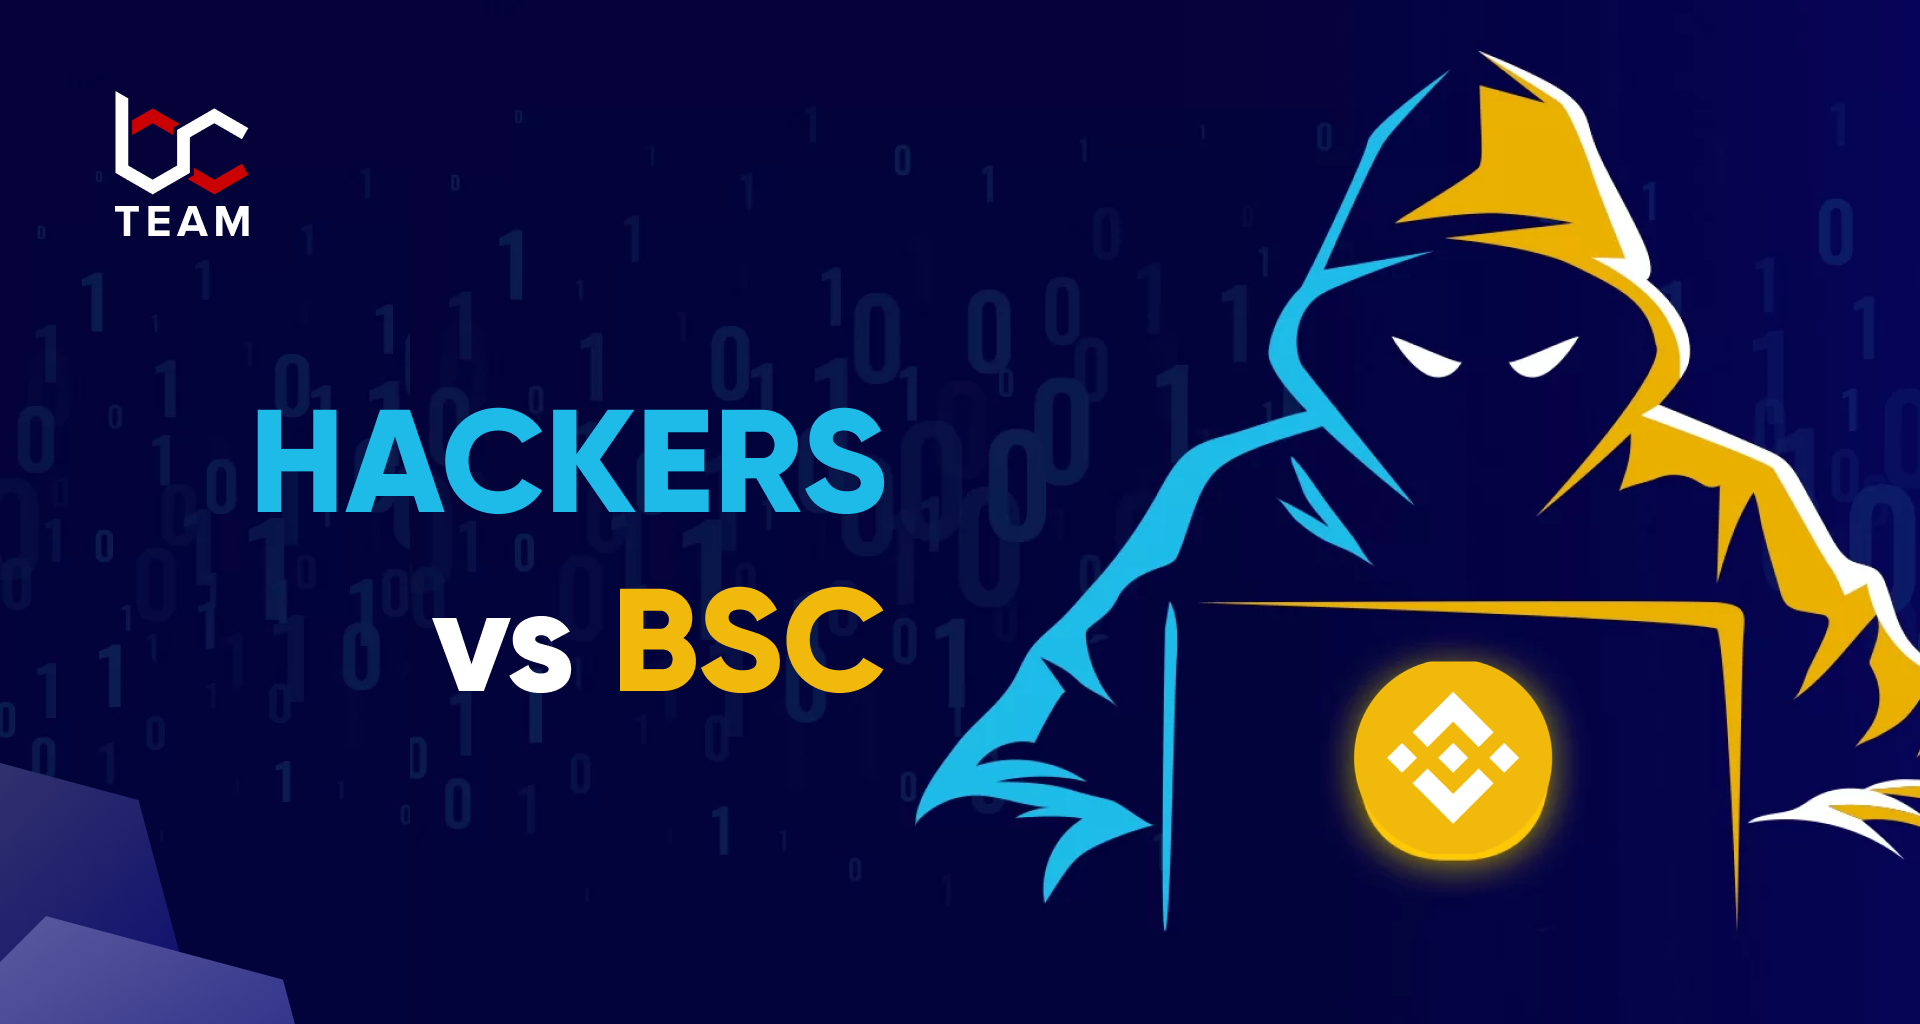 How Hackers are Disrupting Projects on BSC